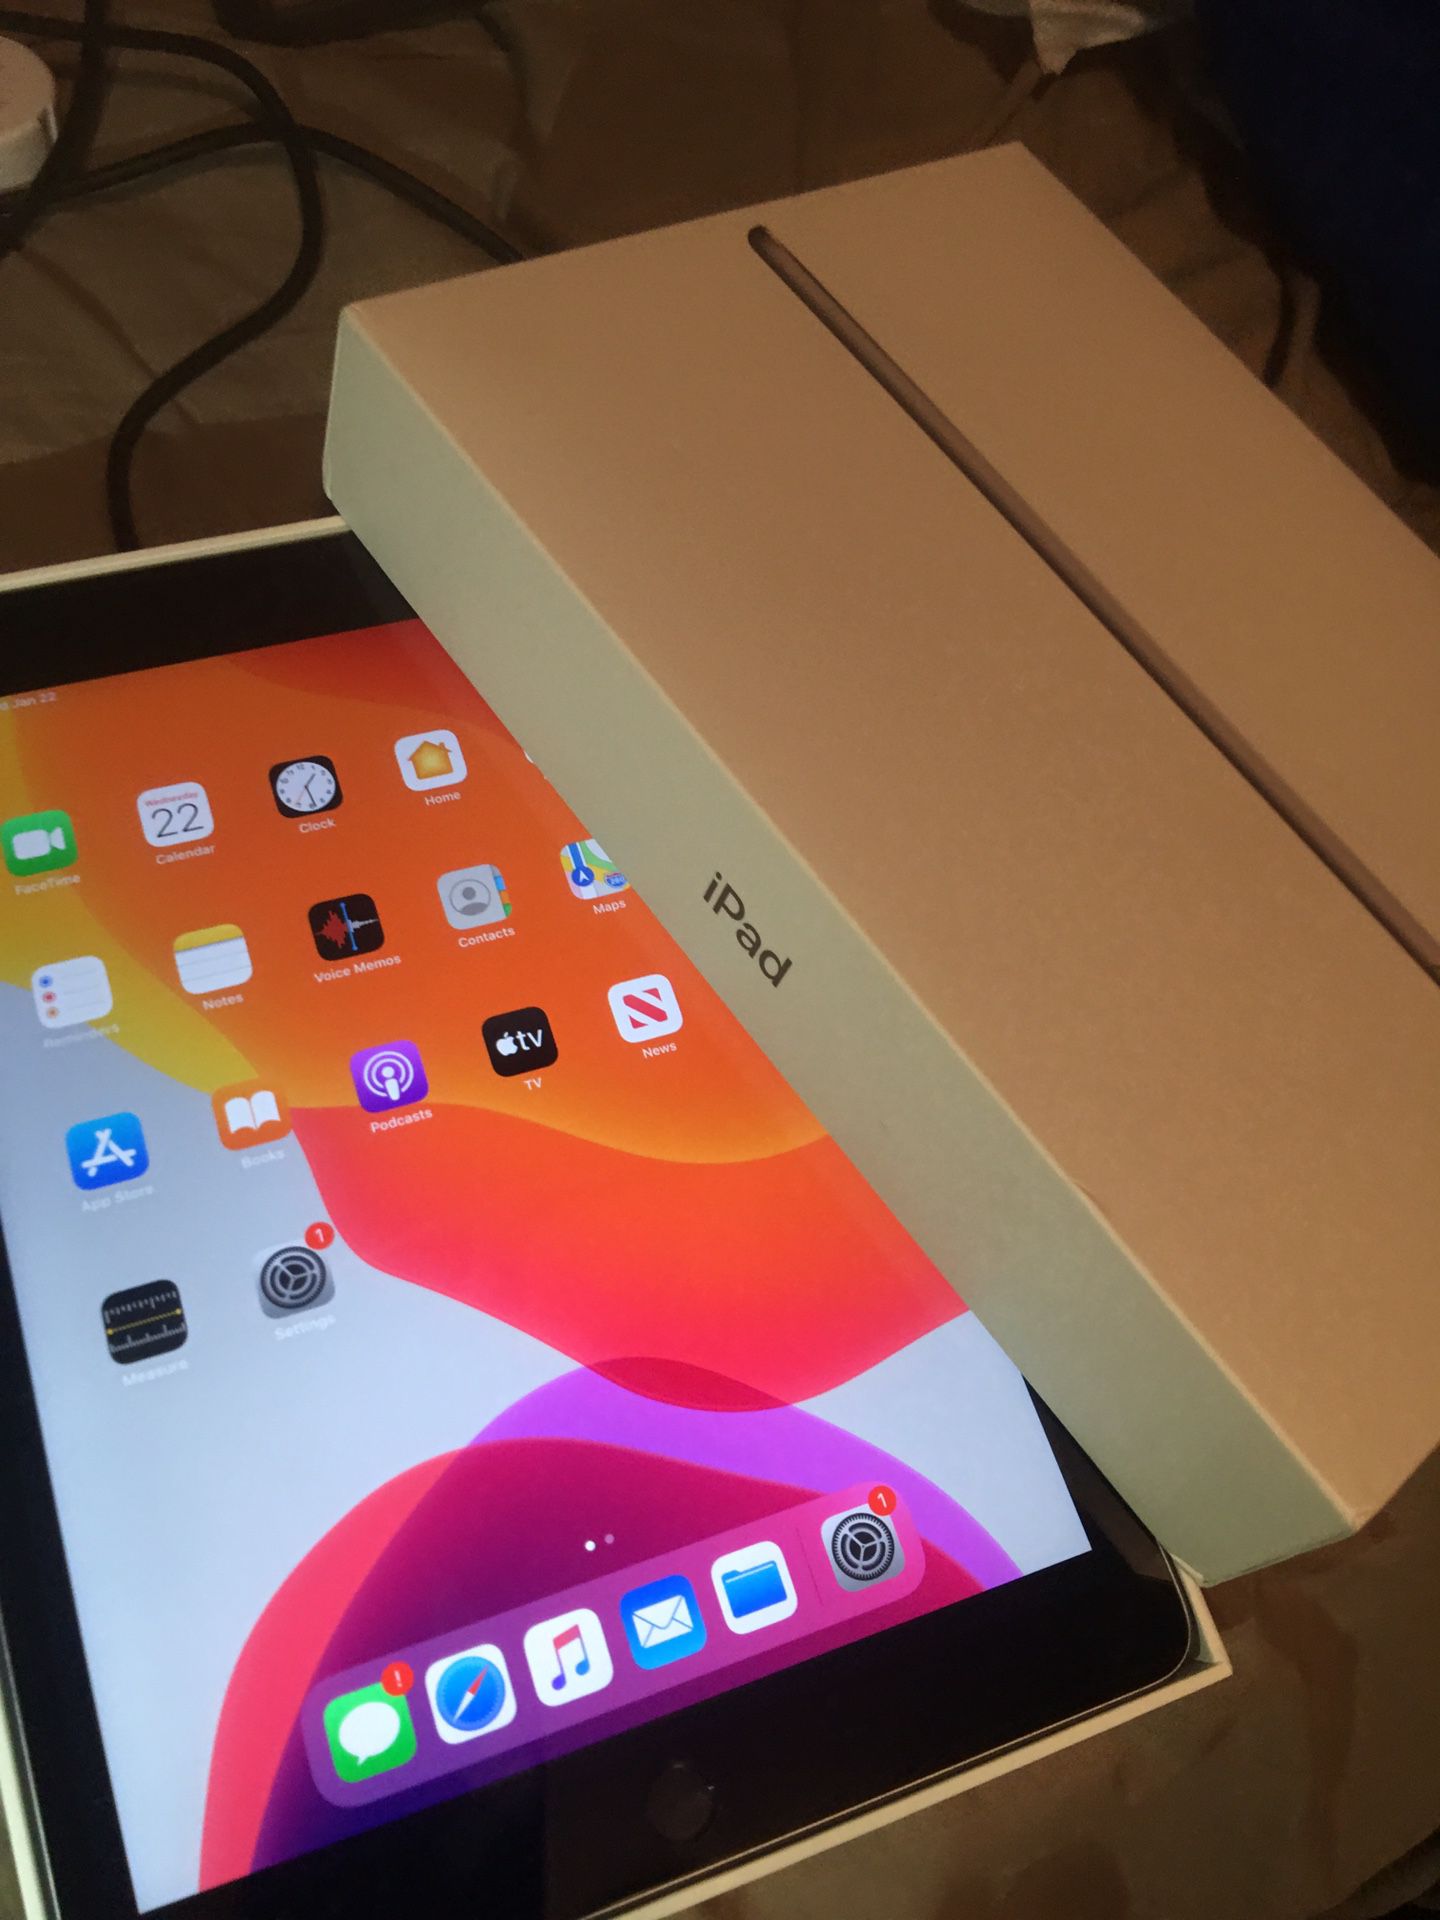 iPad 5th Gen 32GB Wifi/Cellular Any Carrier, IOS 13.3 /in Box $189 Firm price